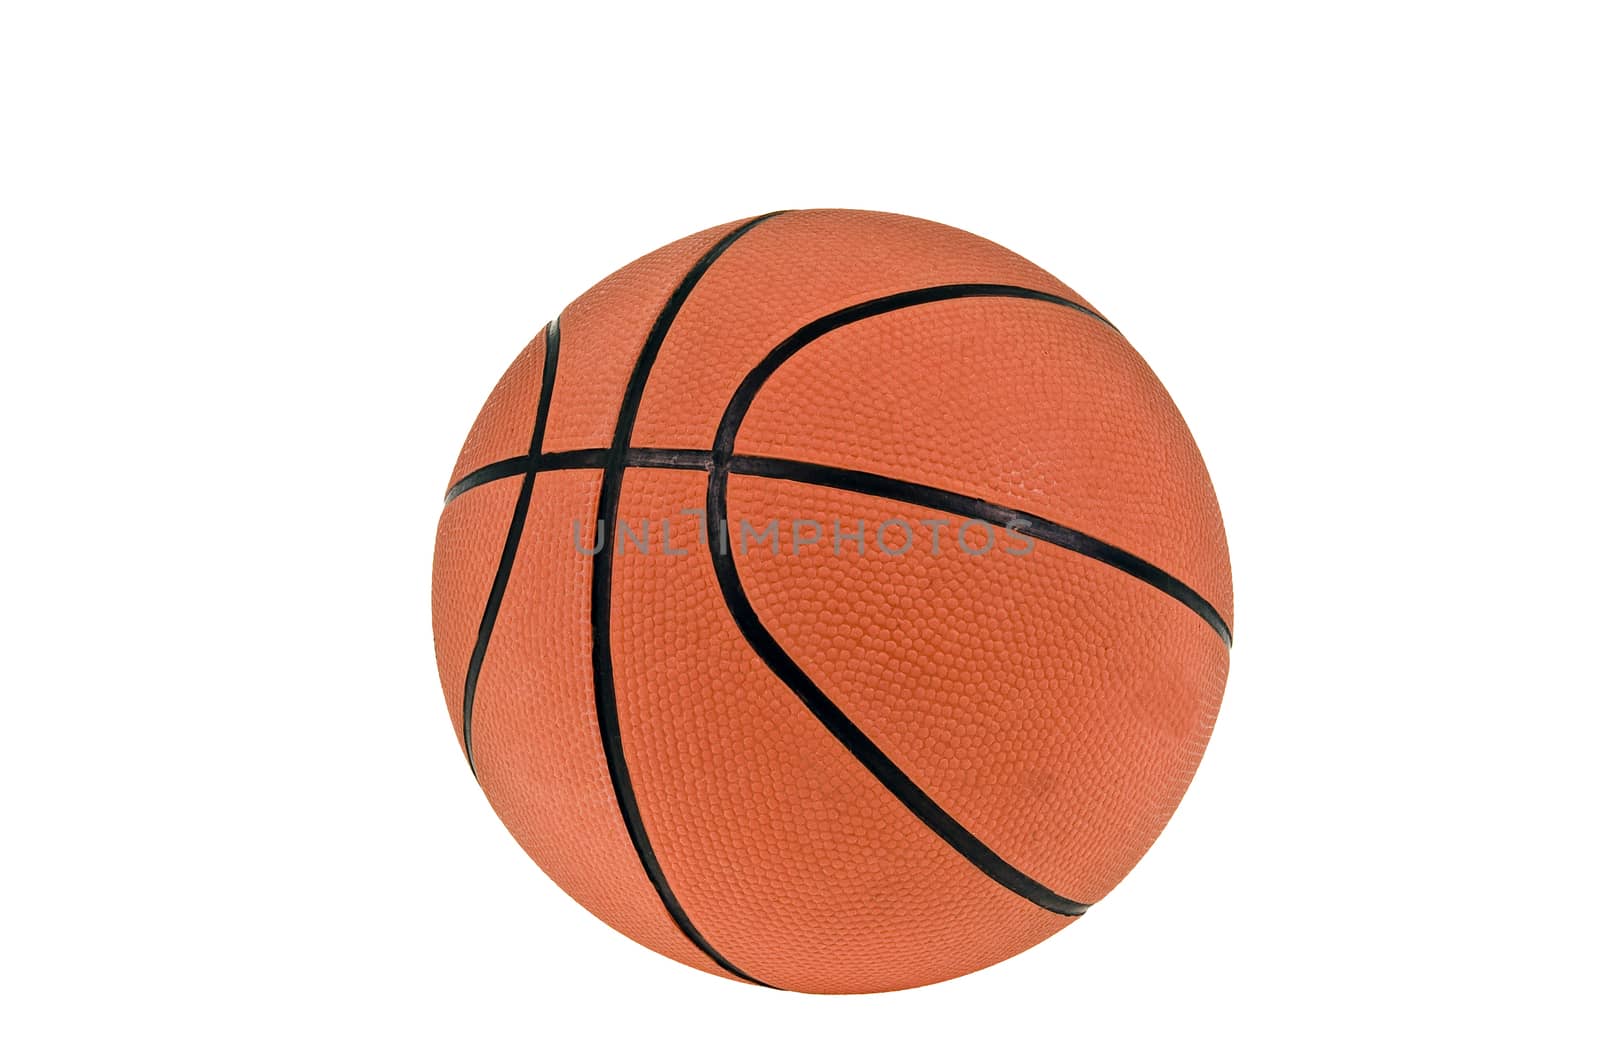 Basketball Isolated On White by stockbuster1